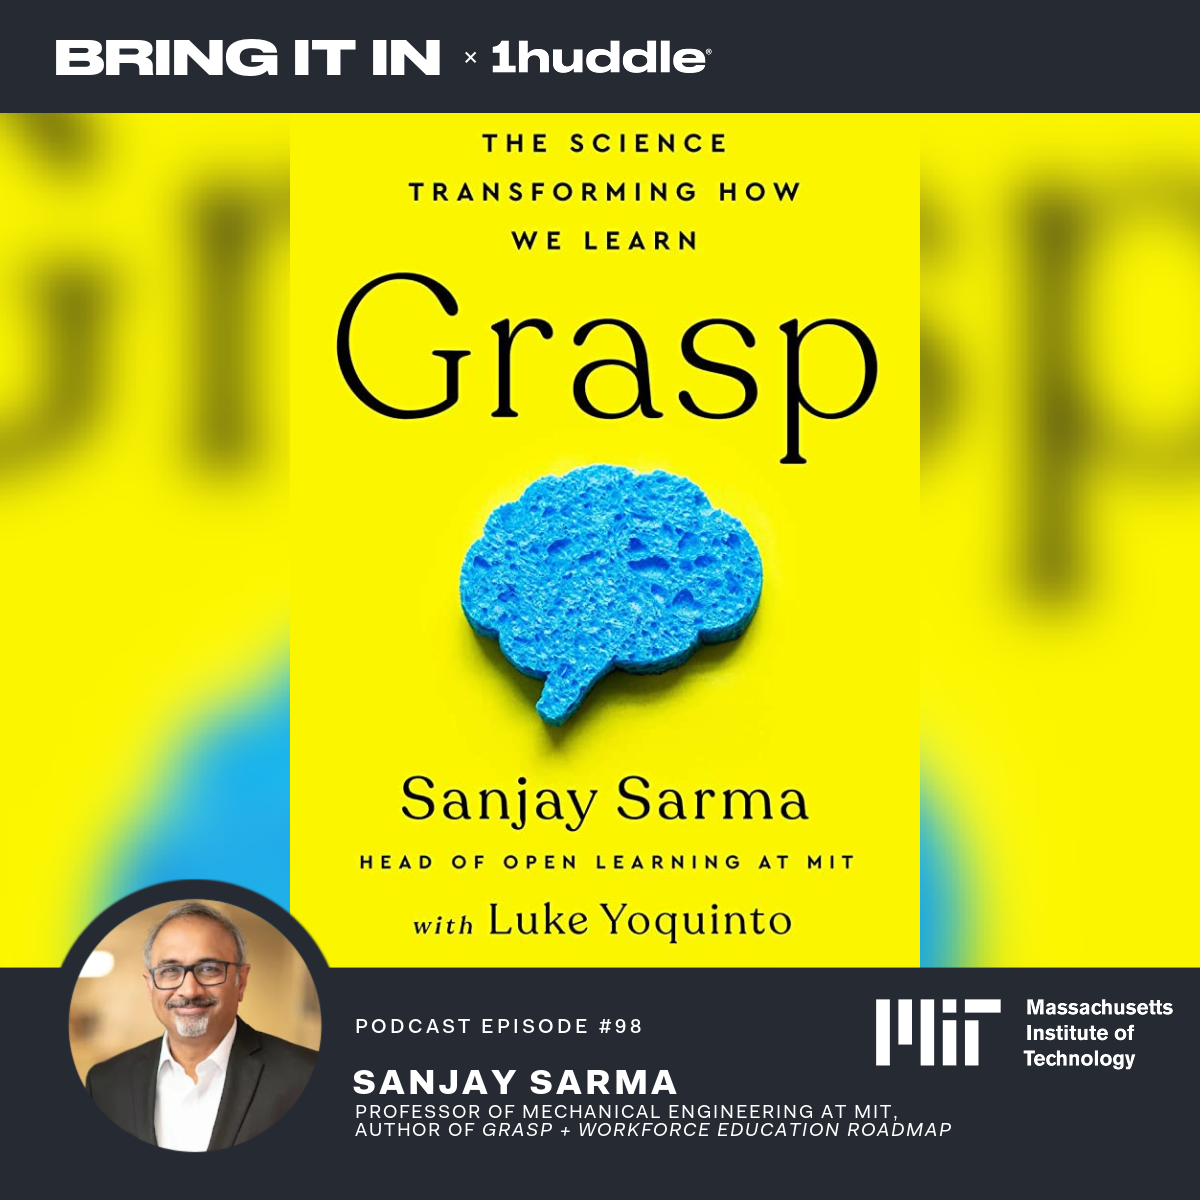 Sanjay Sarma, Professor at MIT, Author of “Grasp: The Science Transforming How We Learn” + “Workforce Education: A New Roadmap”